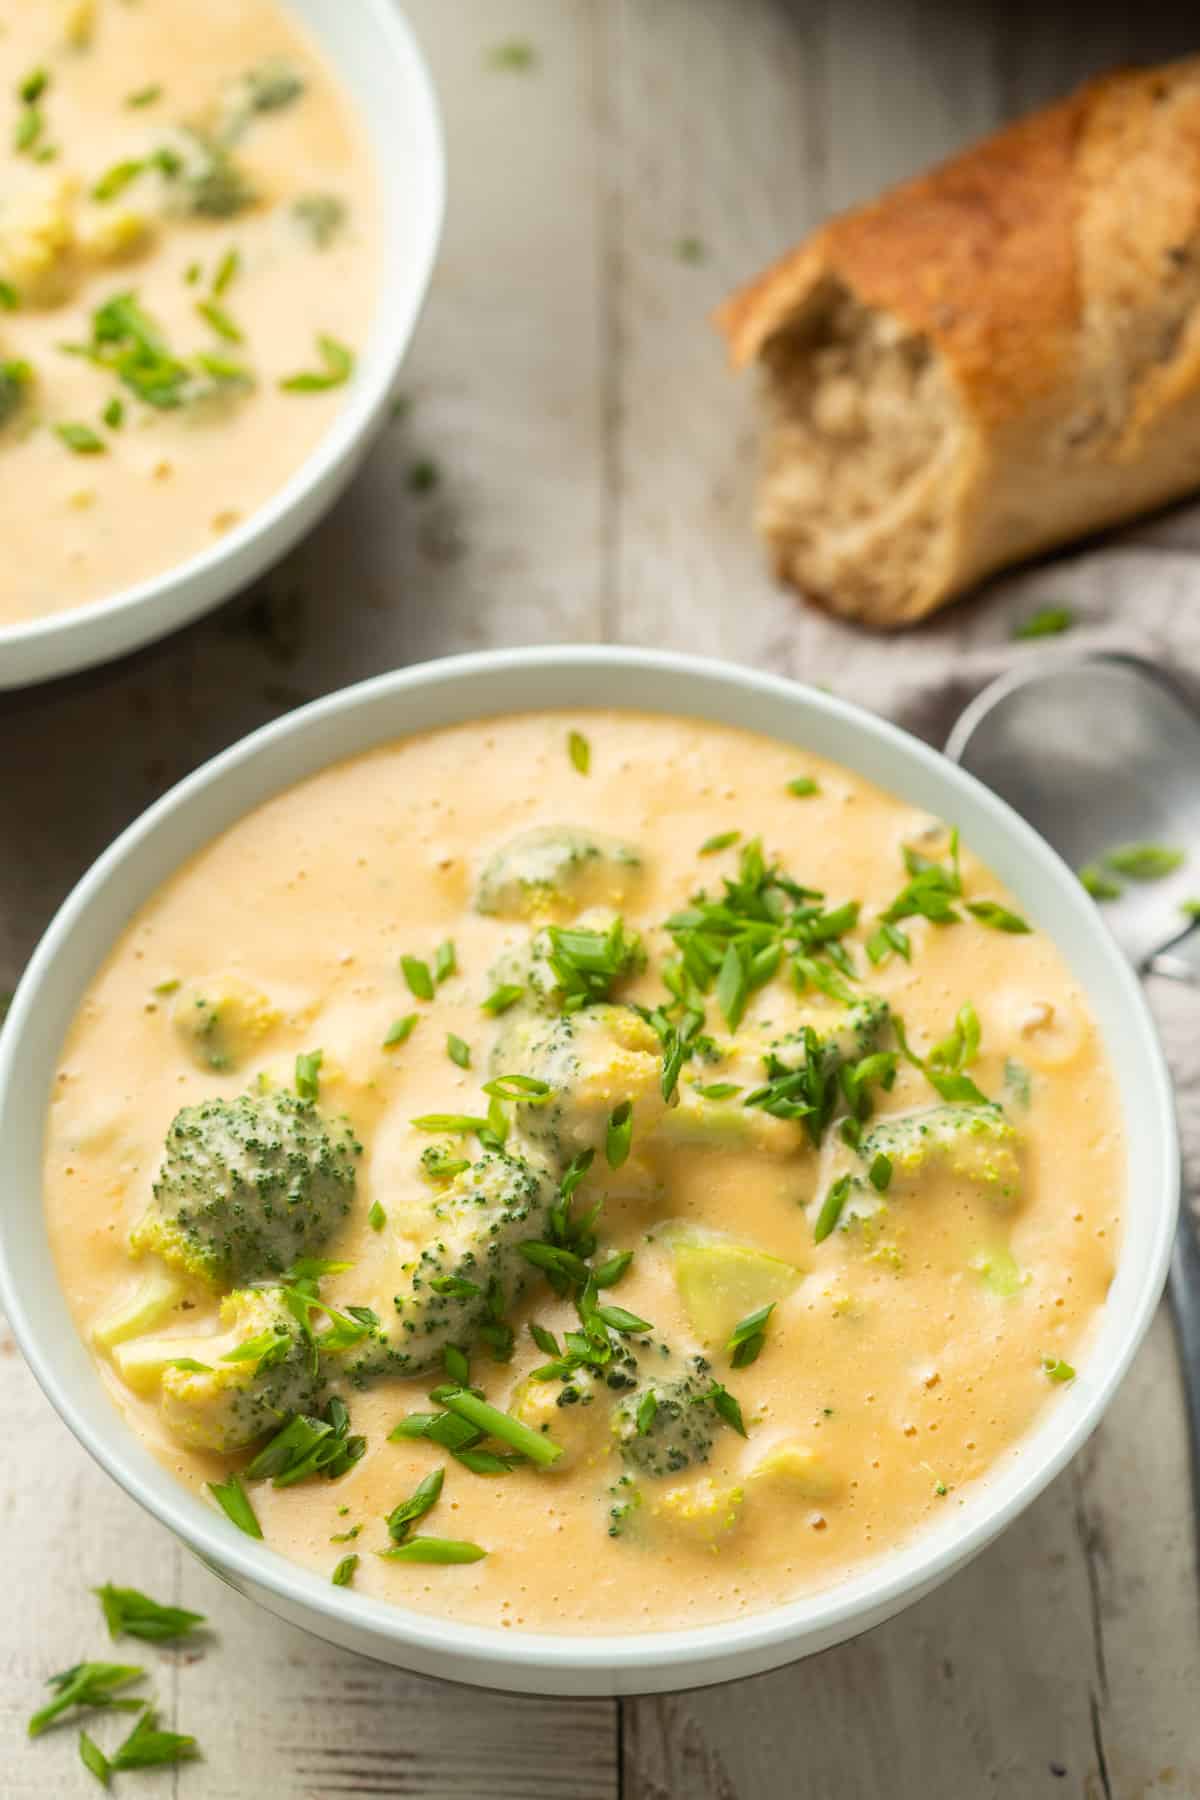 Bowl of Vegan Broccoli Cheddar Soup with a second bowl and baguette in the background.